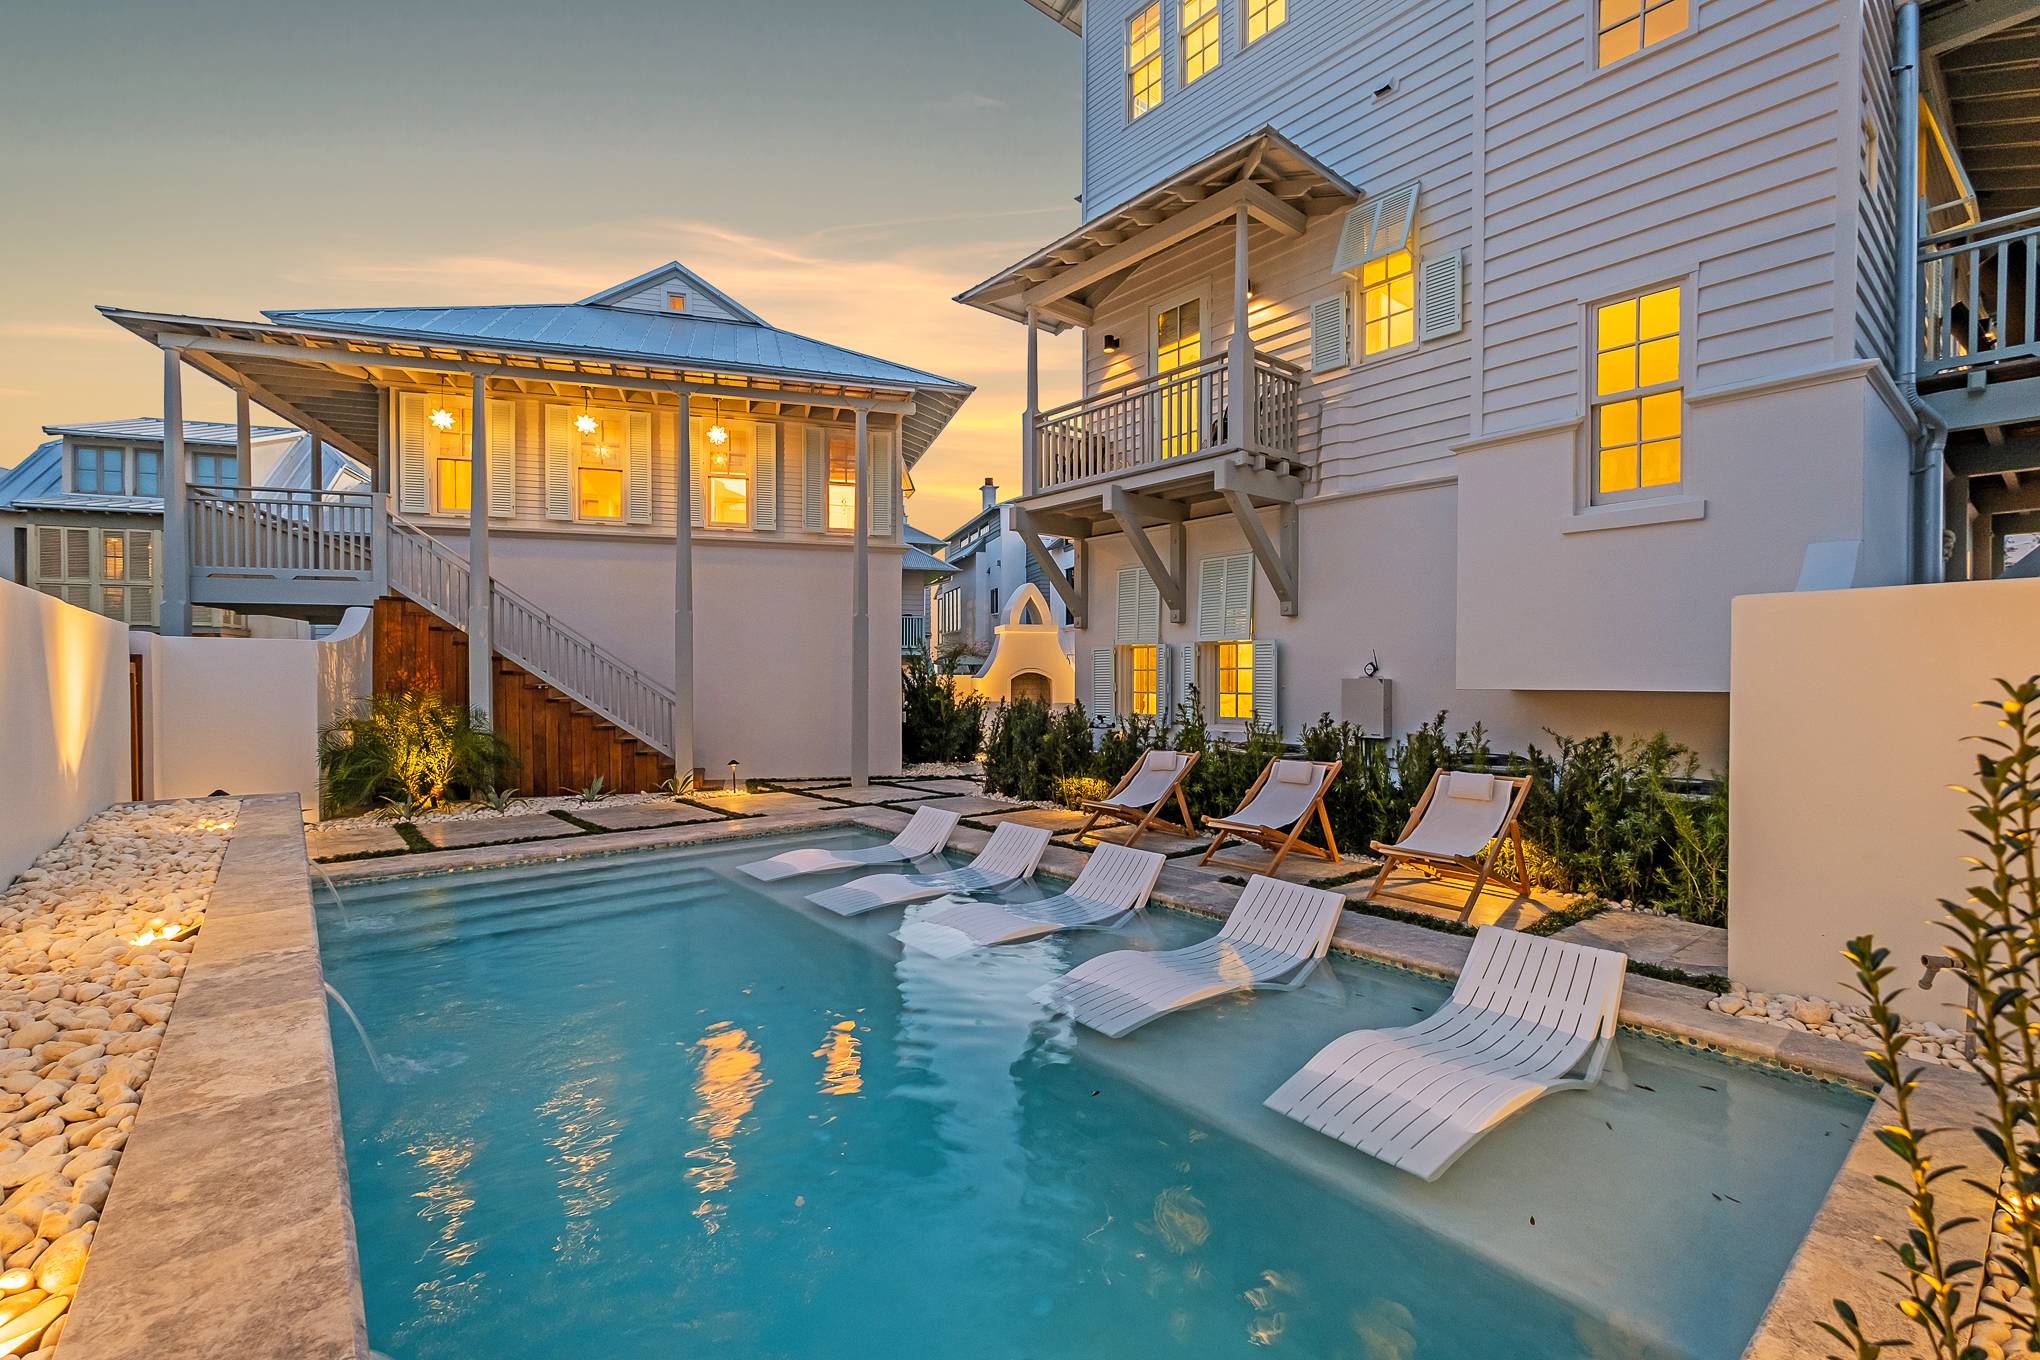 Yolo Cottage & Carriage House - Rosemary Beach Vacation Rental